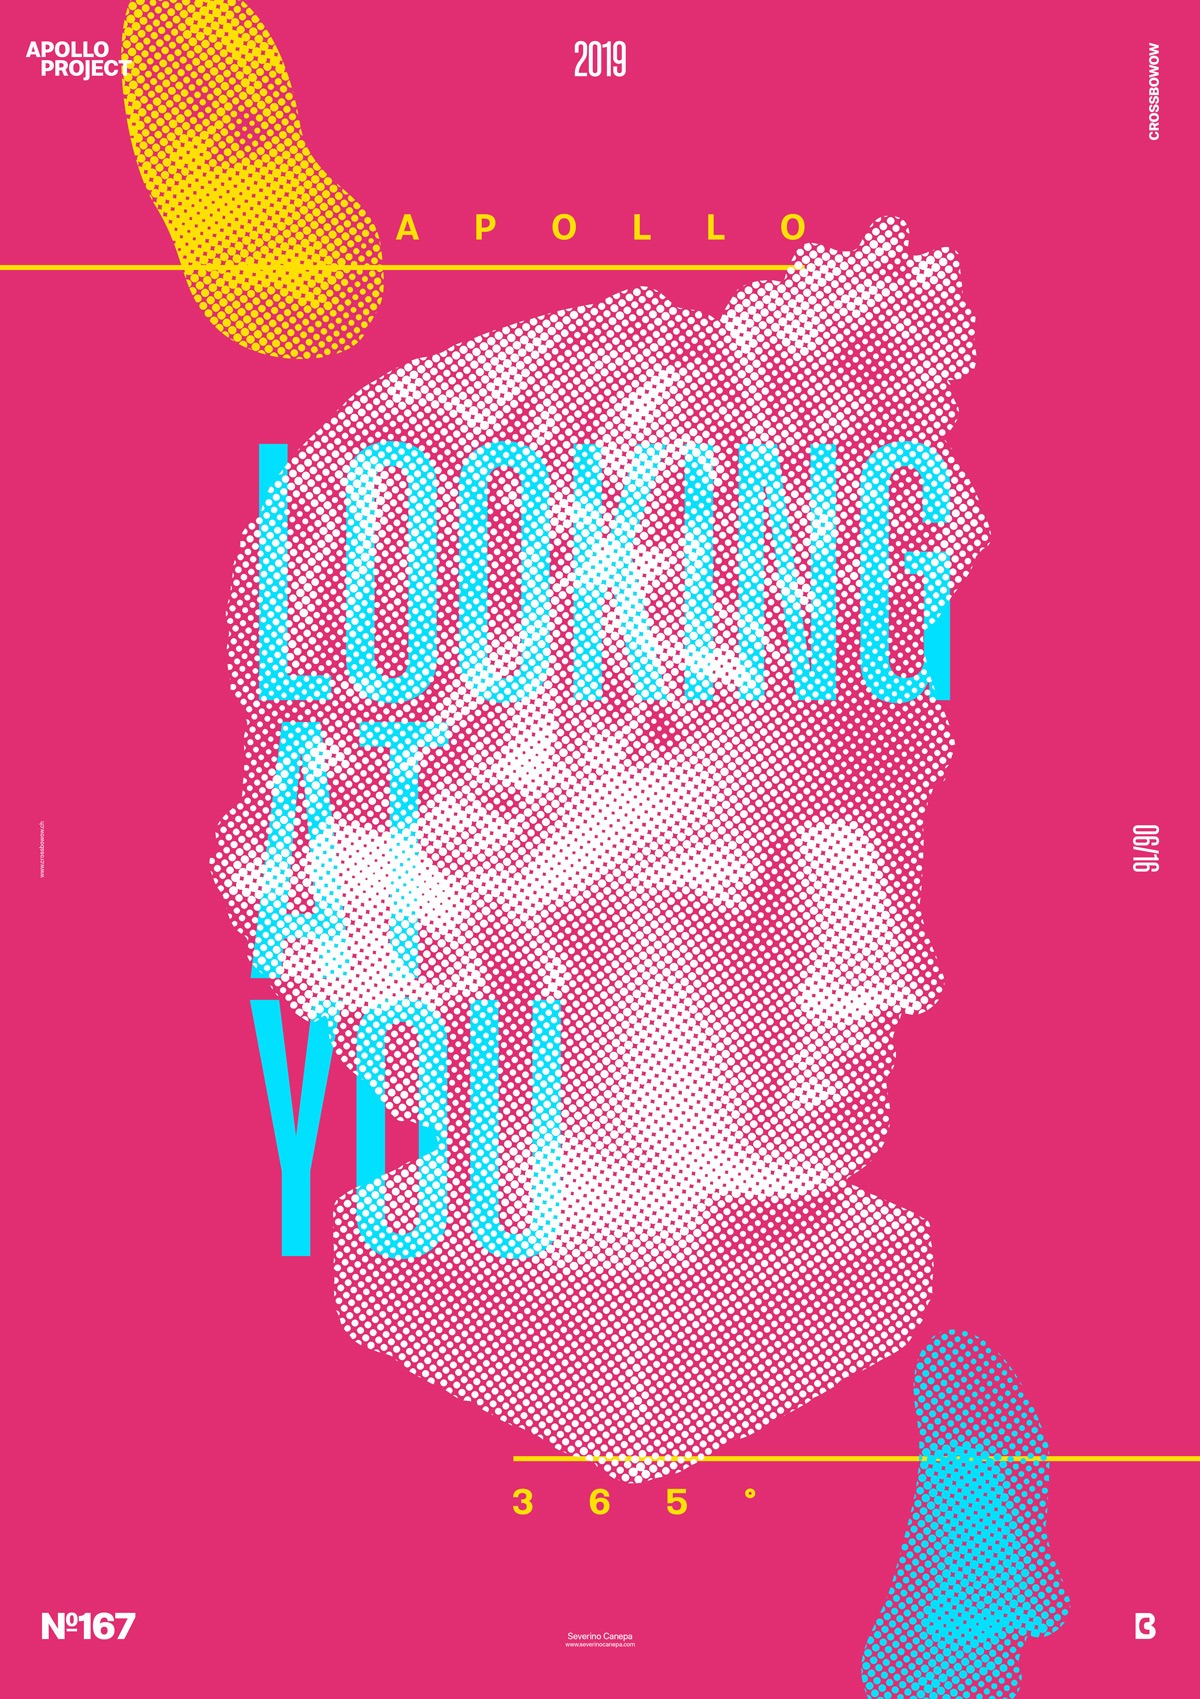 Visual creation of the CMYK and minimalist poster design #167 titled Looking at you